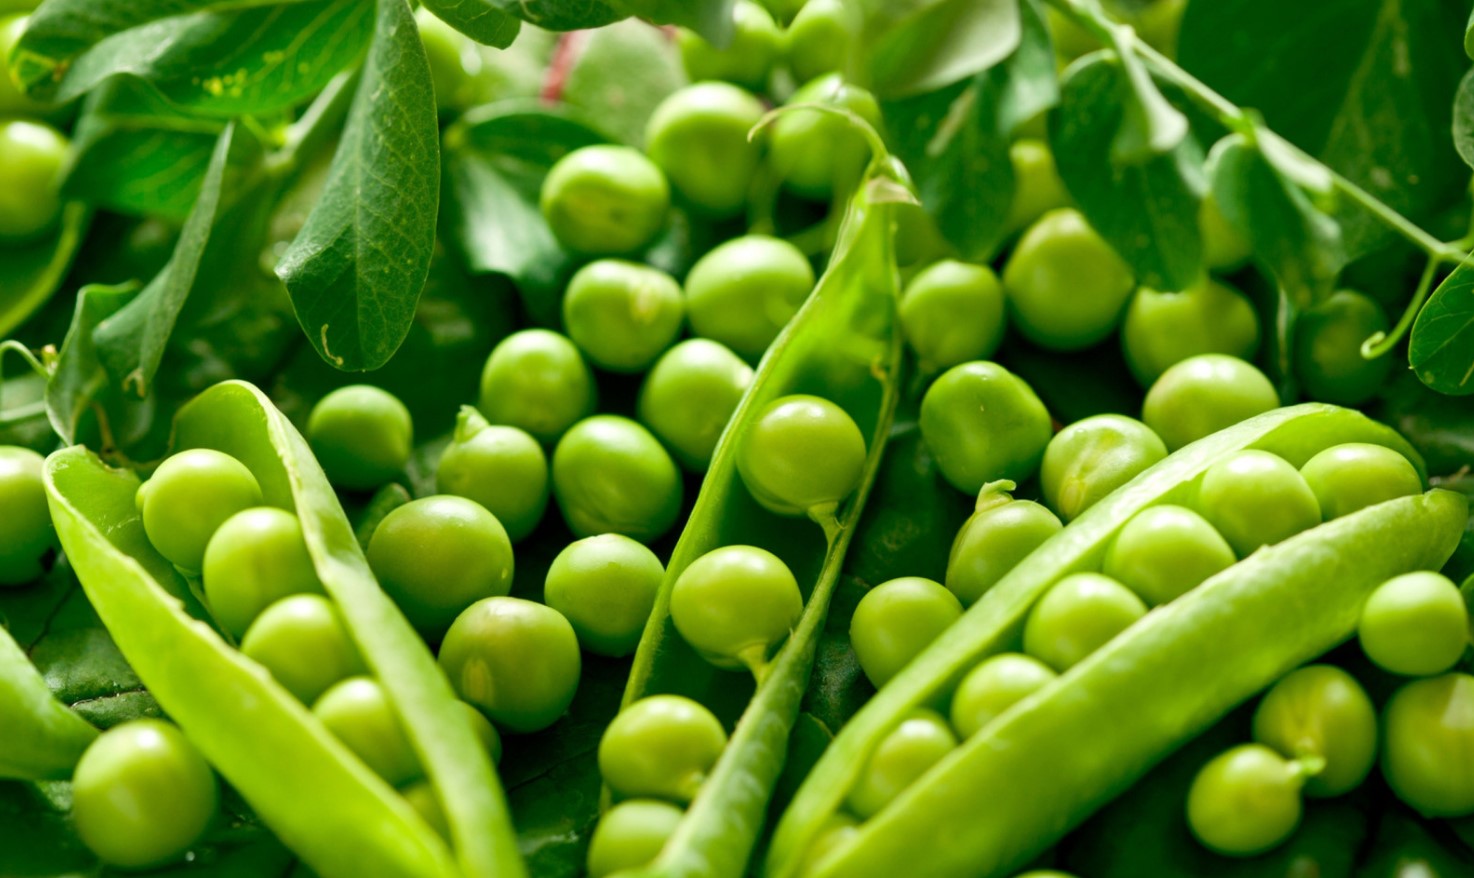 Green Peas are High Protein Vegetarian Meals